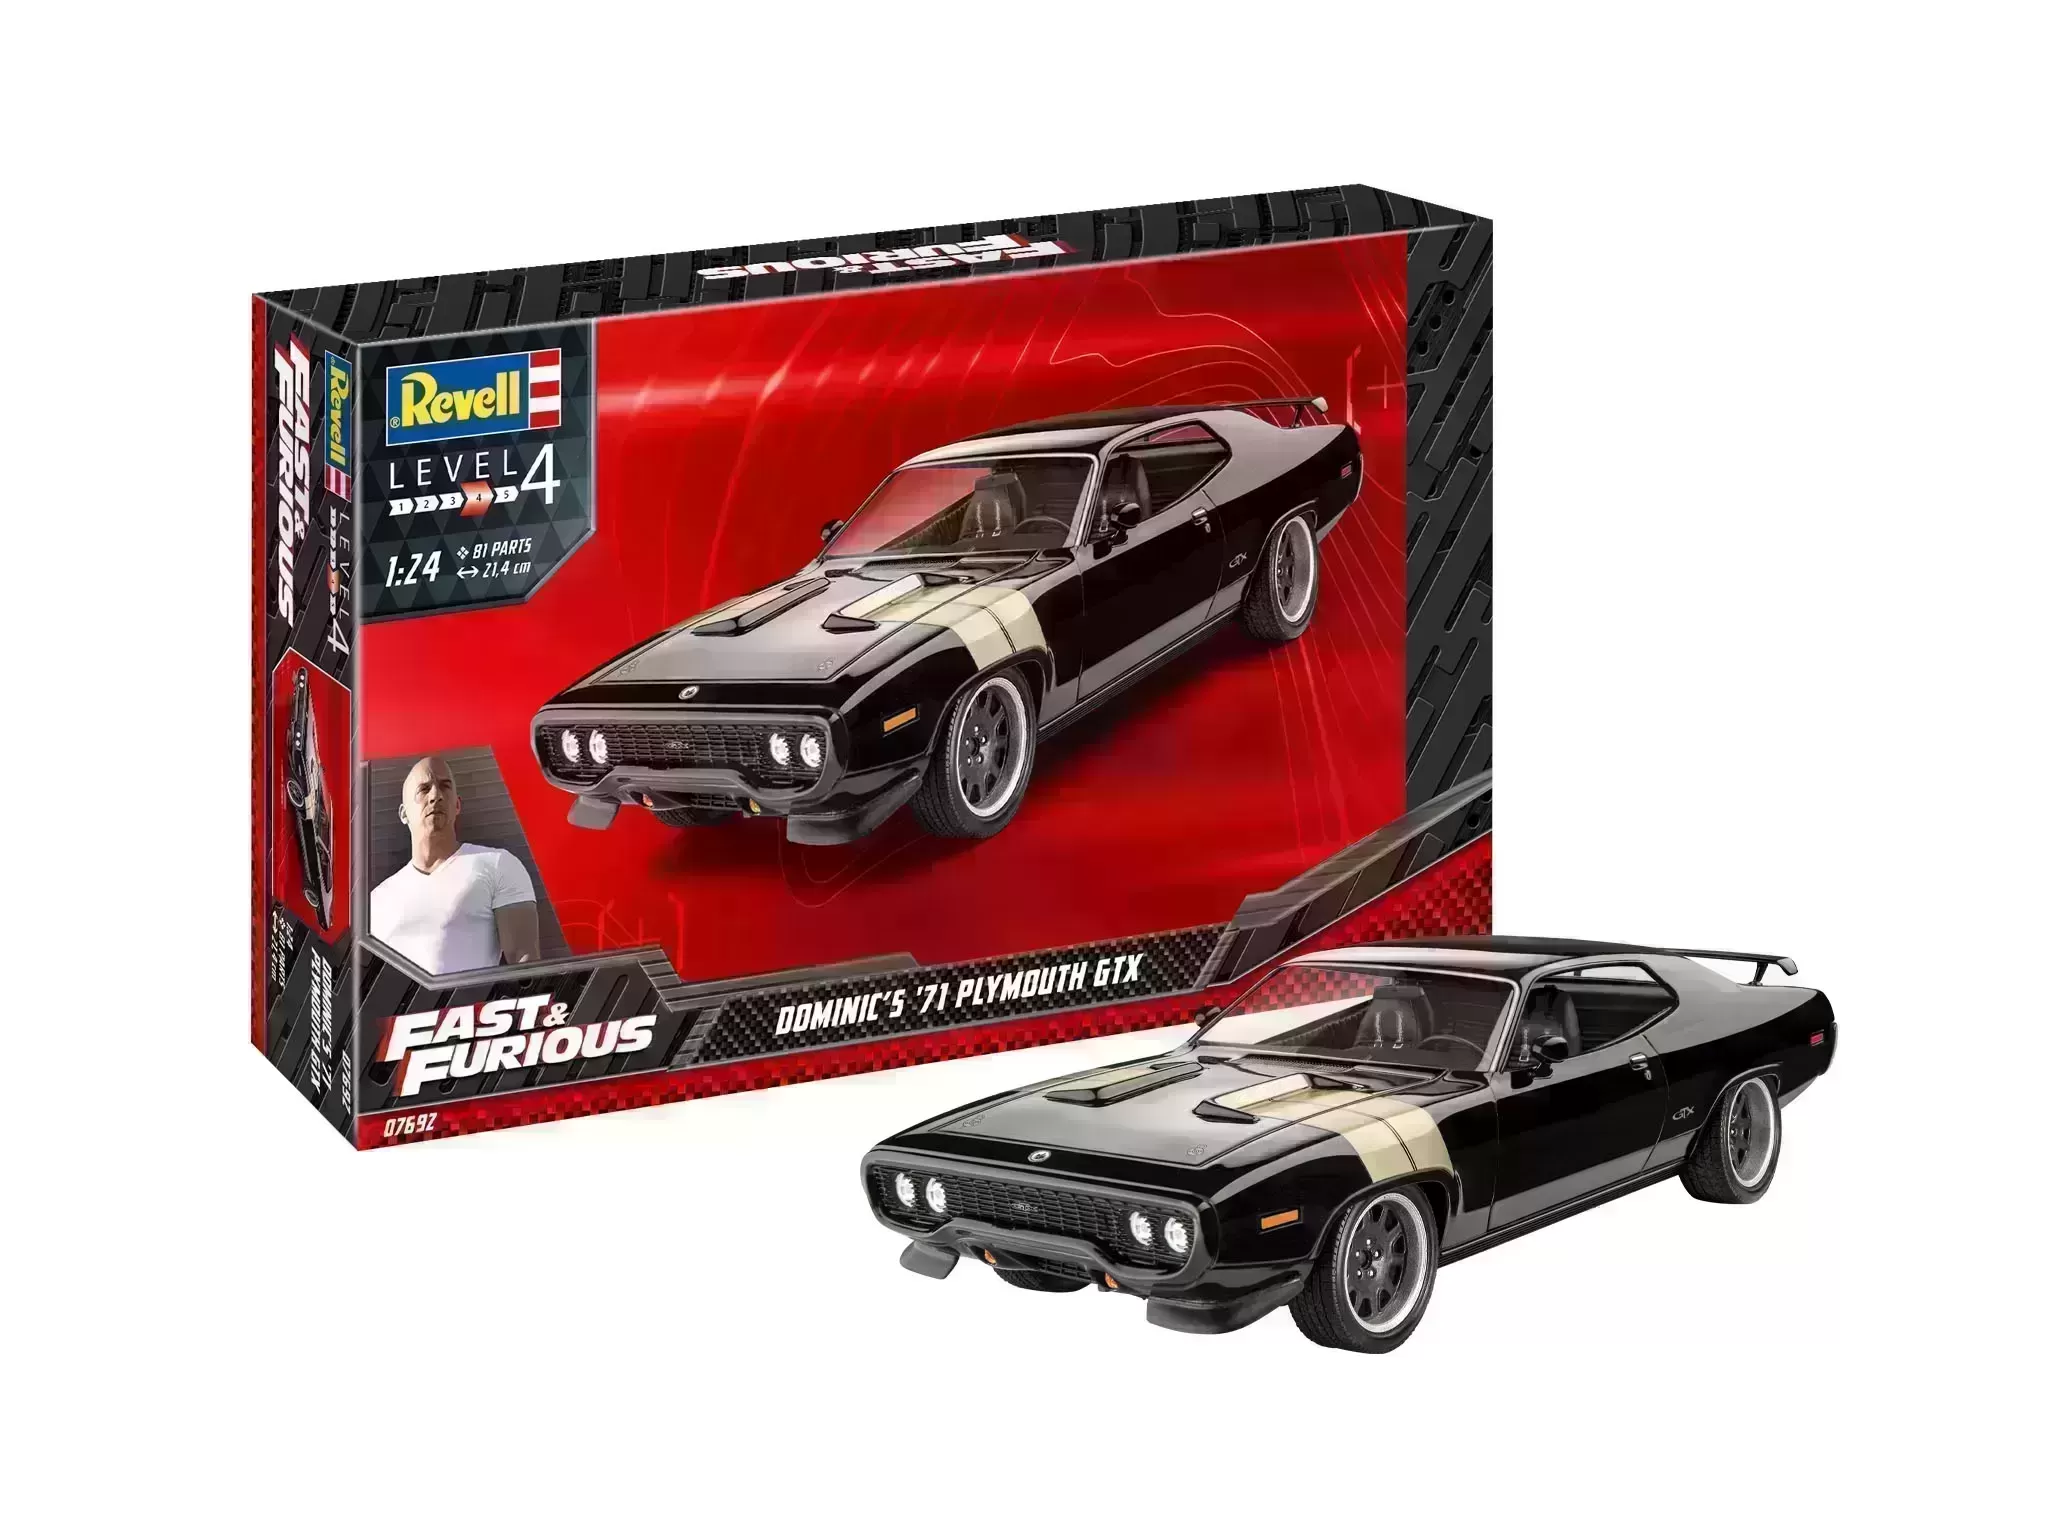 Modelset Fast and Furious: Dominics 1971 Plymouth GTX - 1:24